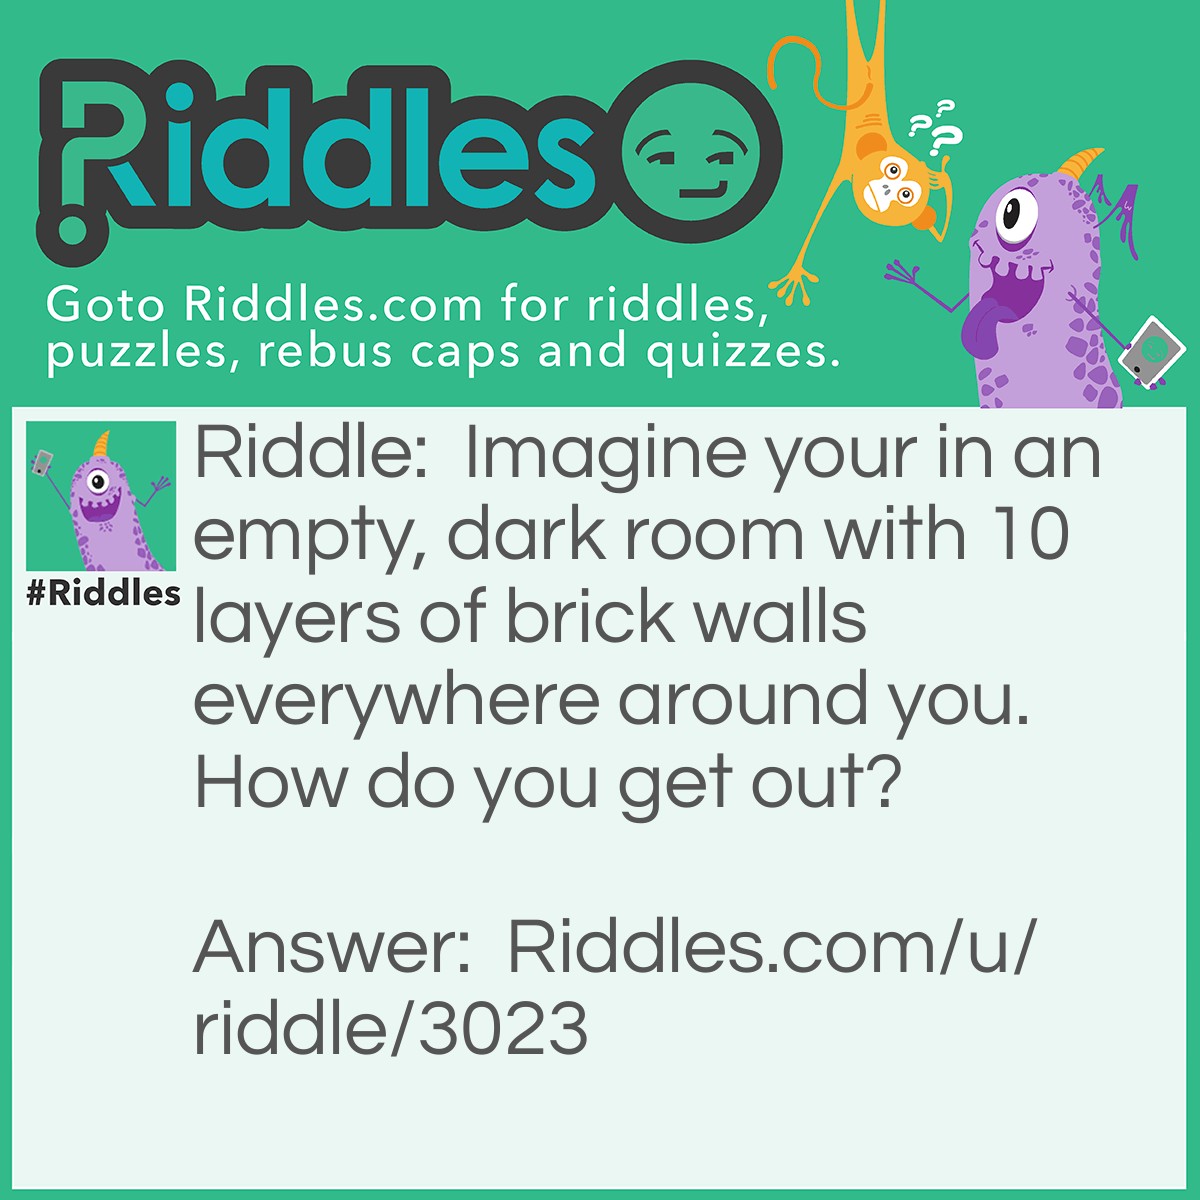 Riddle: Imagine your in an empty, dark room with 10 layers of brick walls everywhere around you. How do you get out? Answer: Stop imagining :)